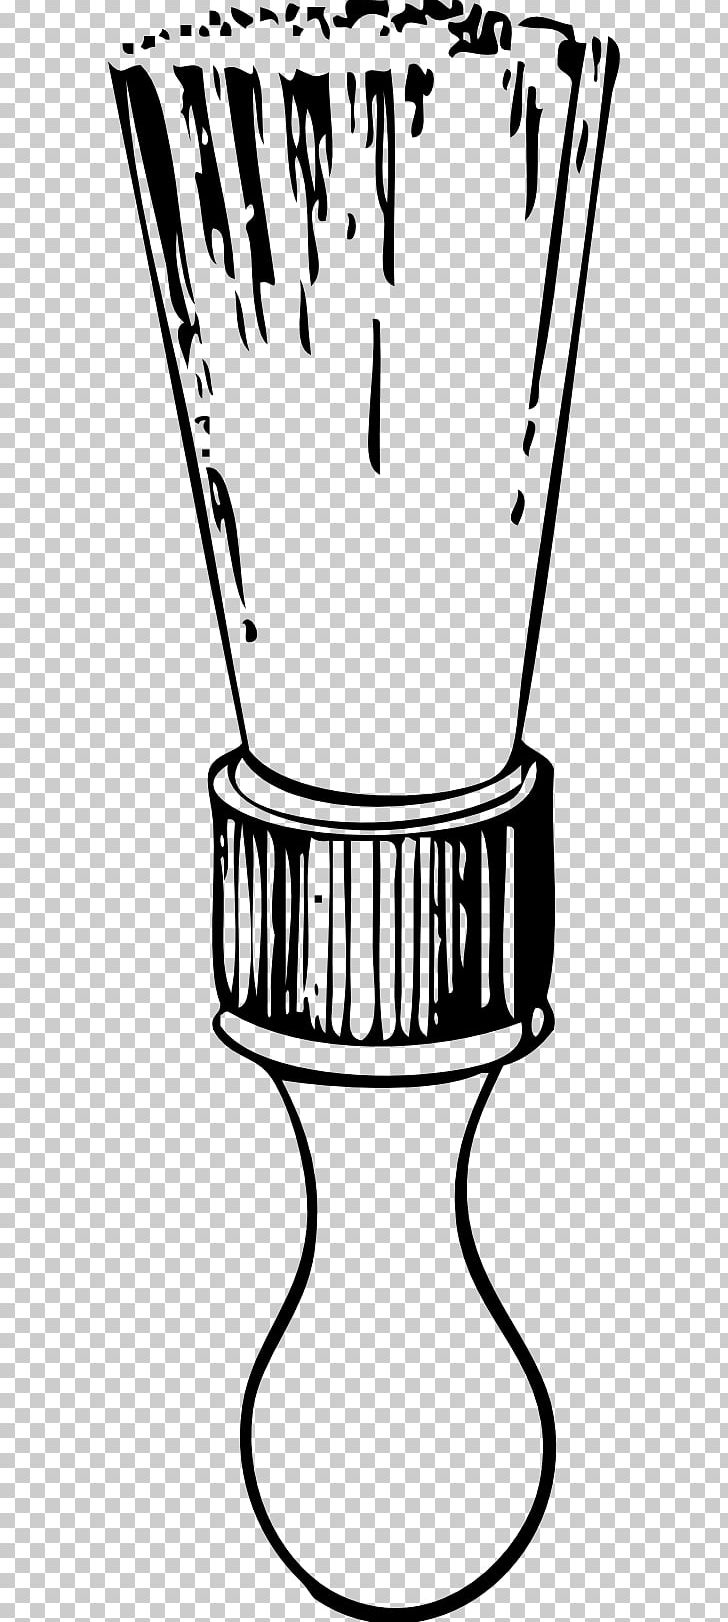 Comb Shaving Shave Brush PNG, Clipart, Area, Barber, Black, Black And White, Brush Free PNG Download